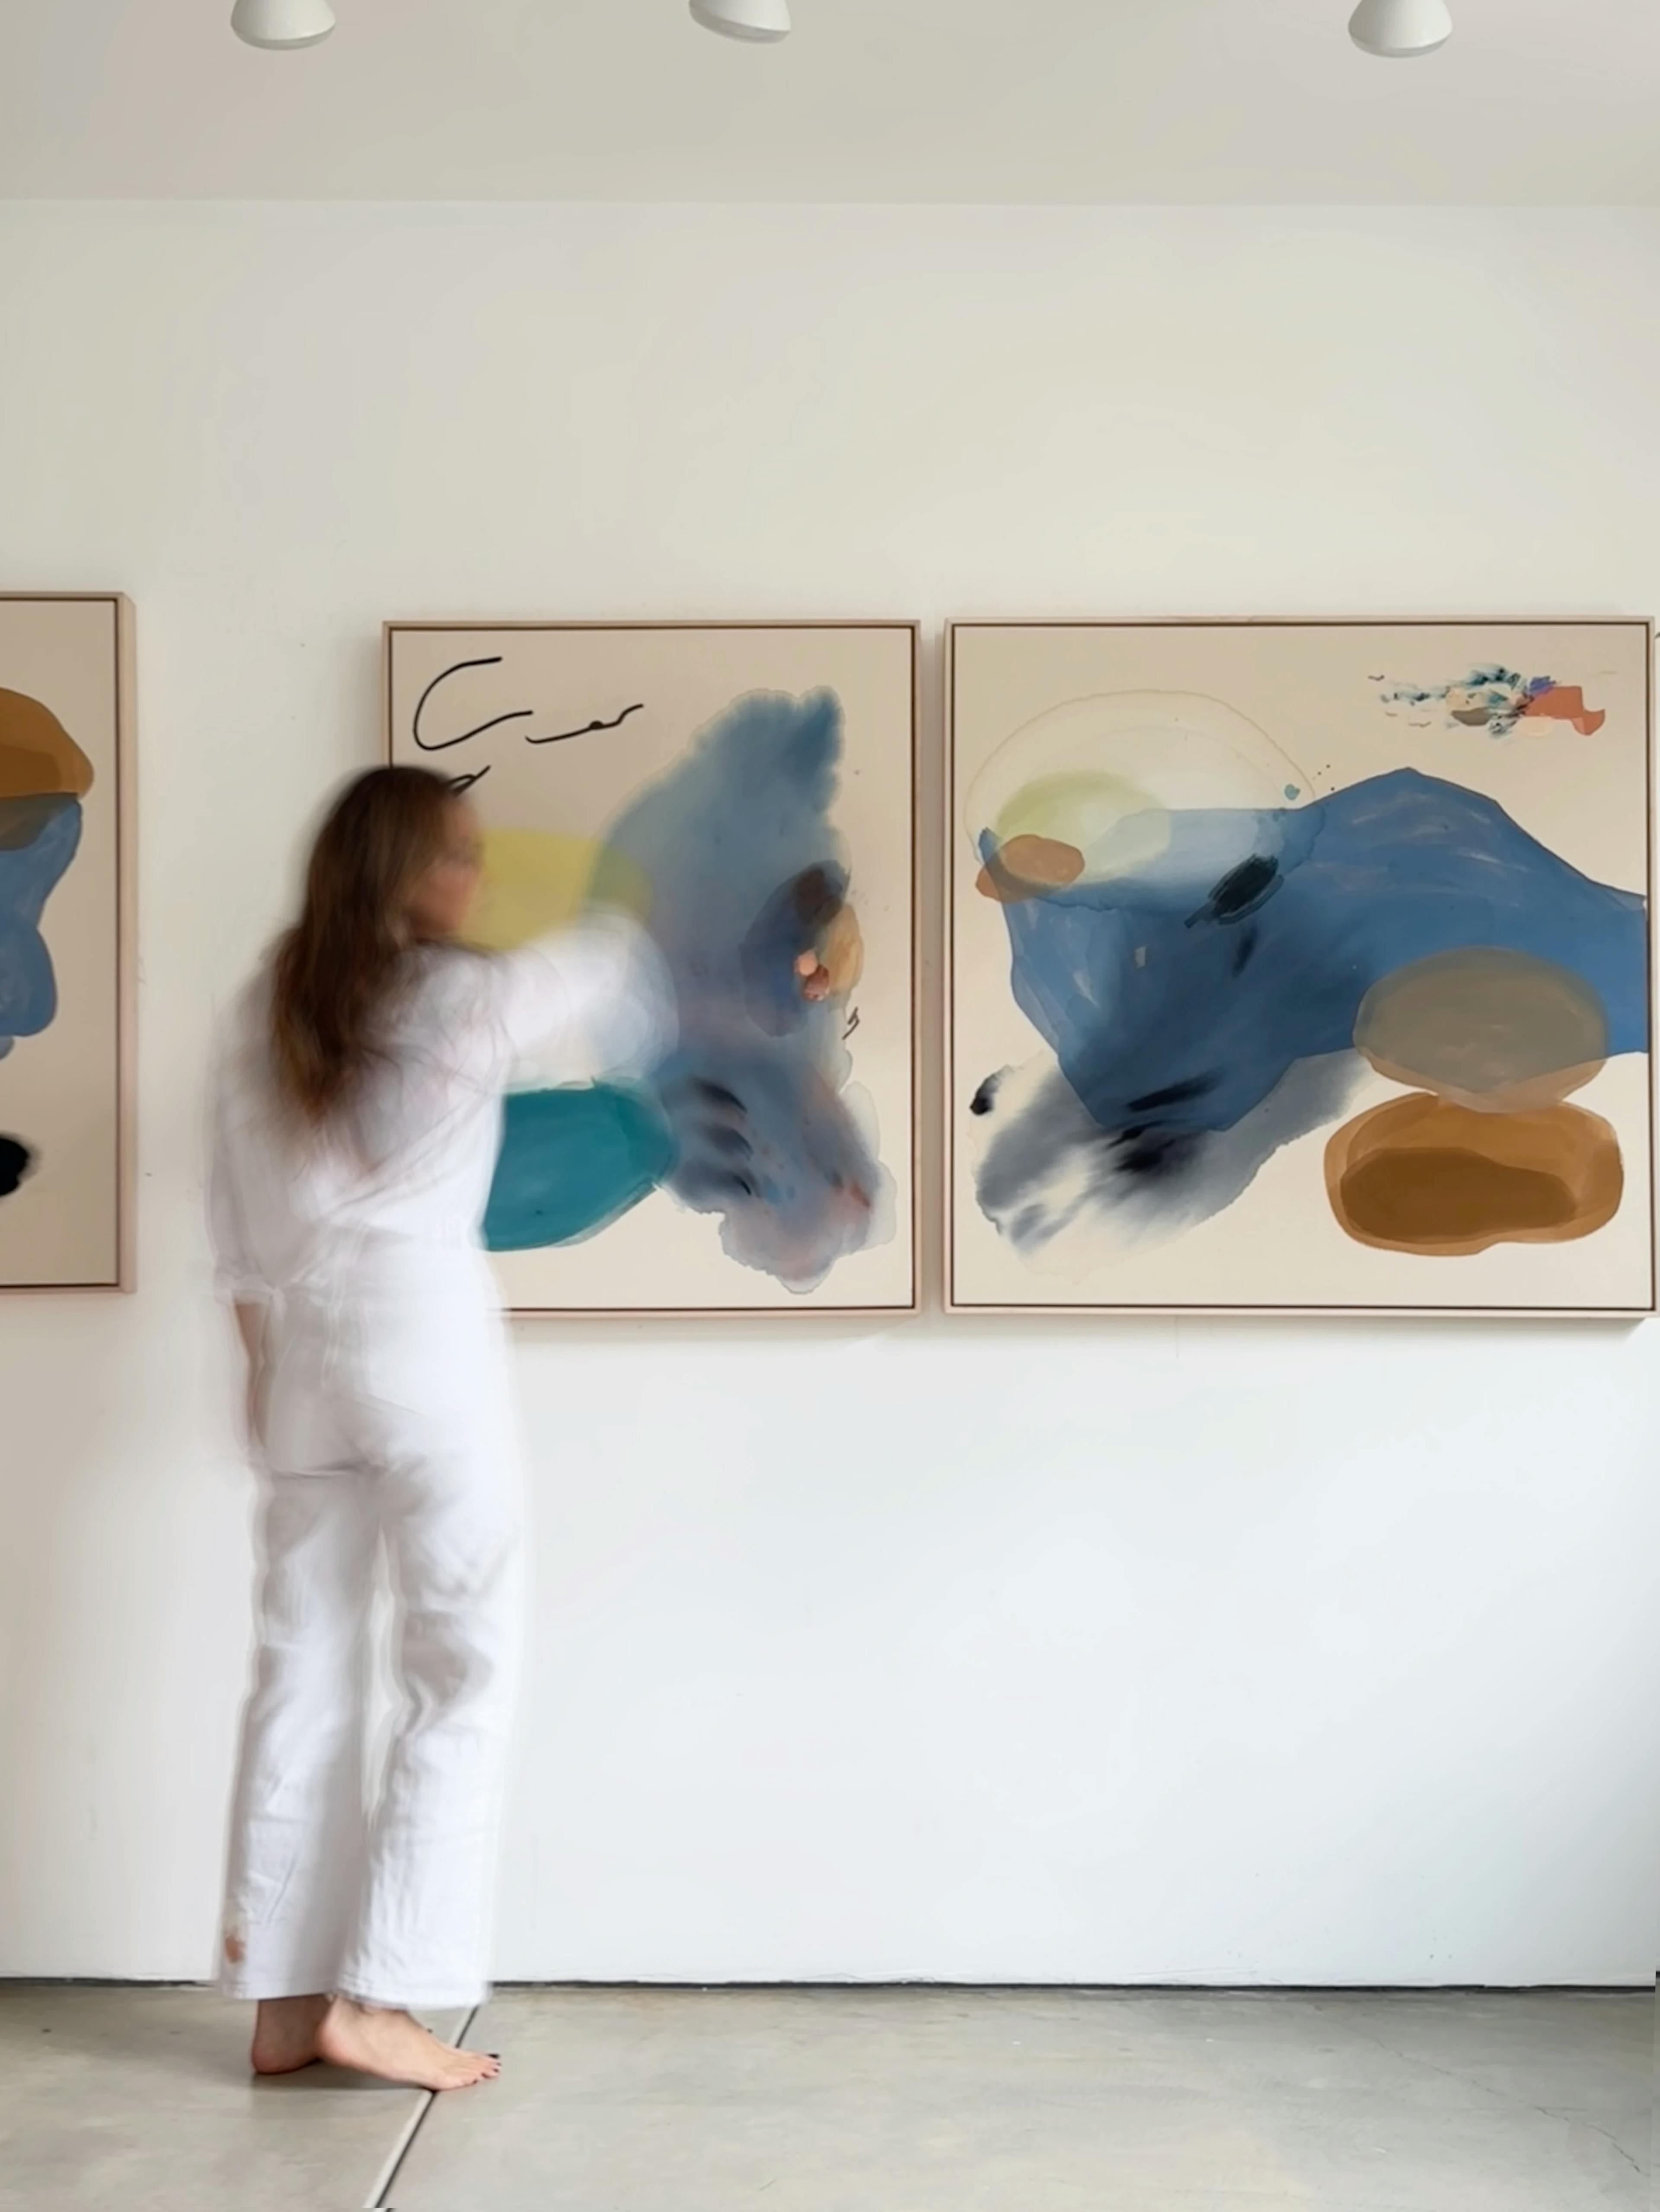 Artist Karina Bania blurred and standing in front of her gestural paintings.